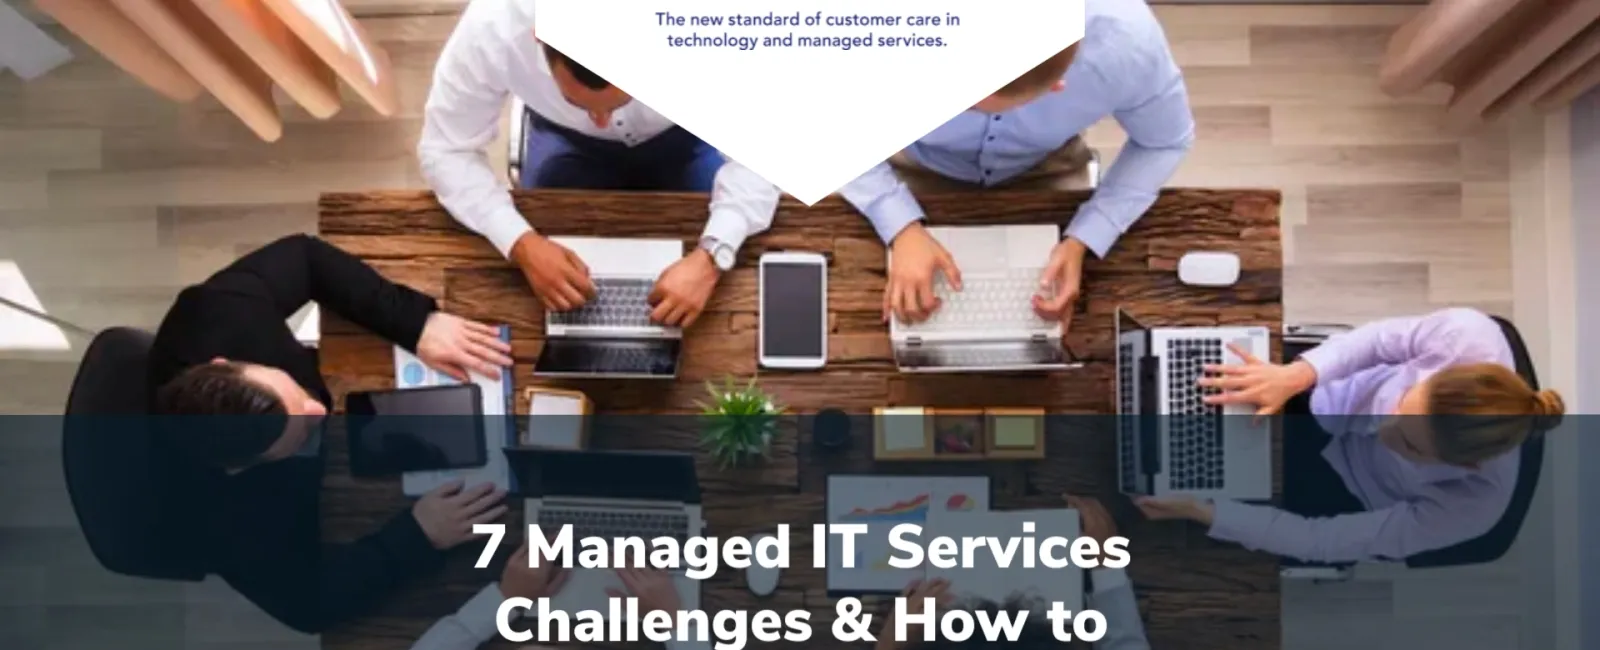 7 Managed IT Services Challenges & How to Mitigate Them